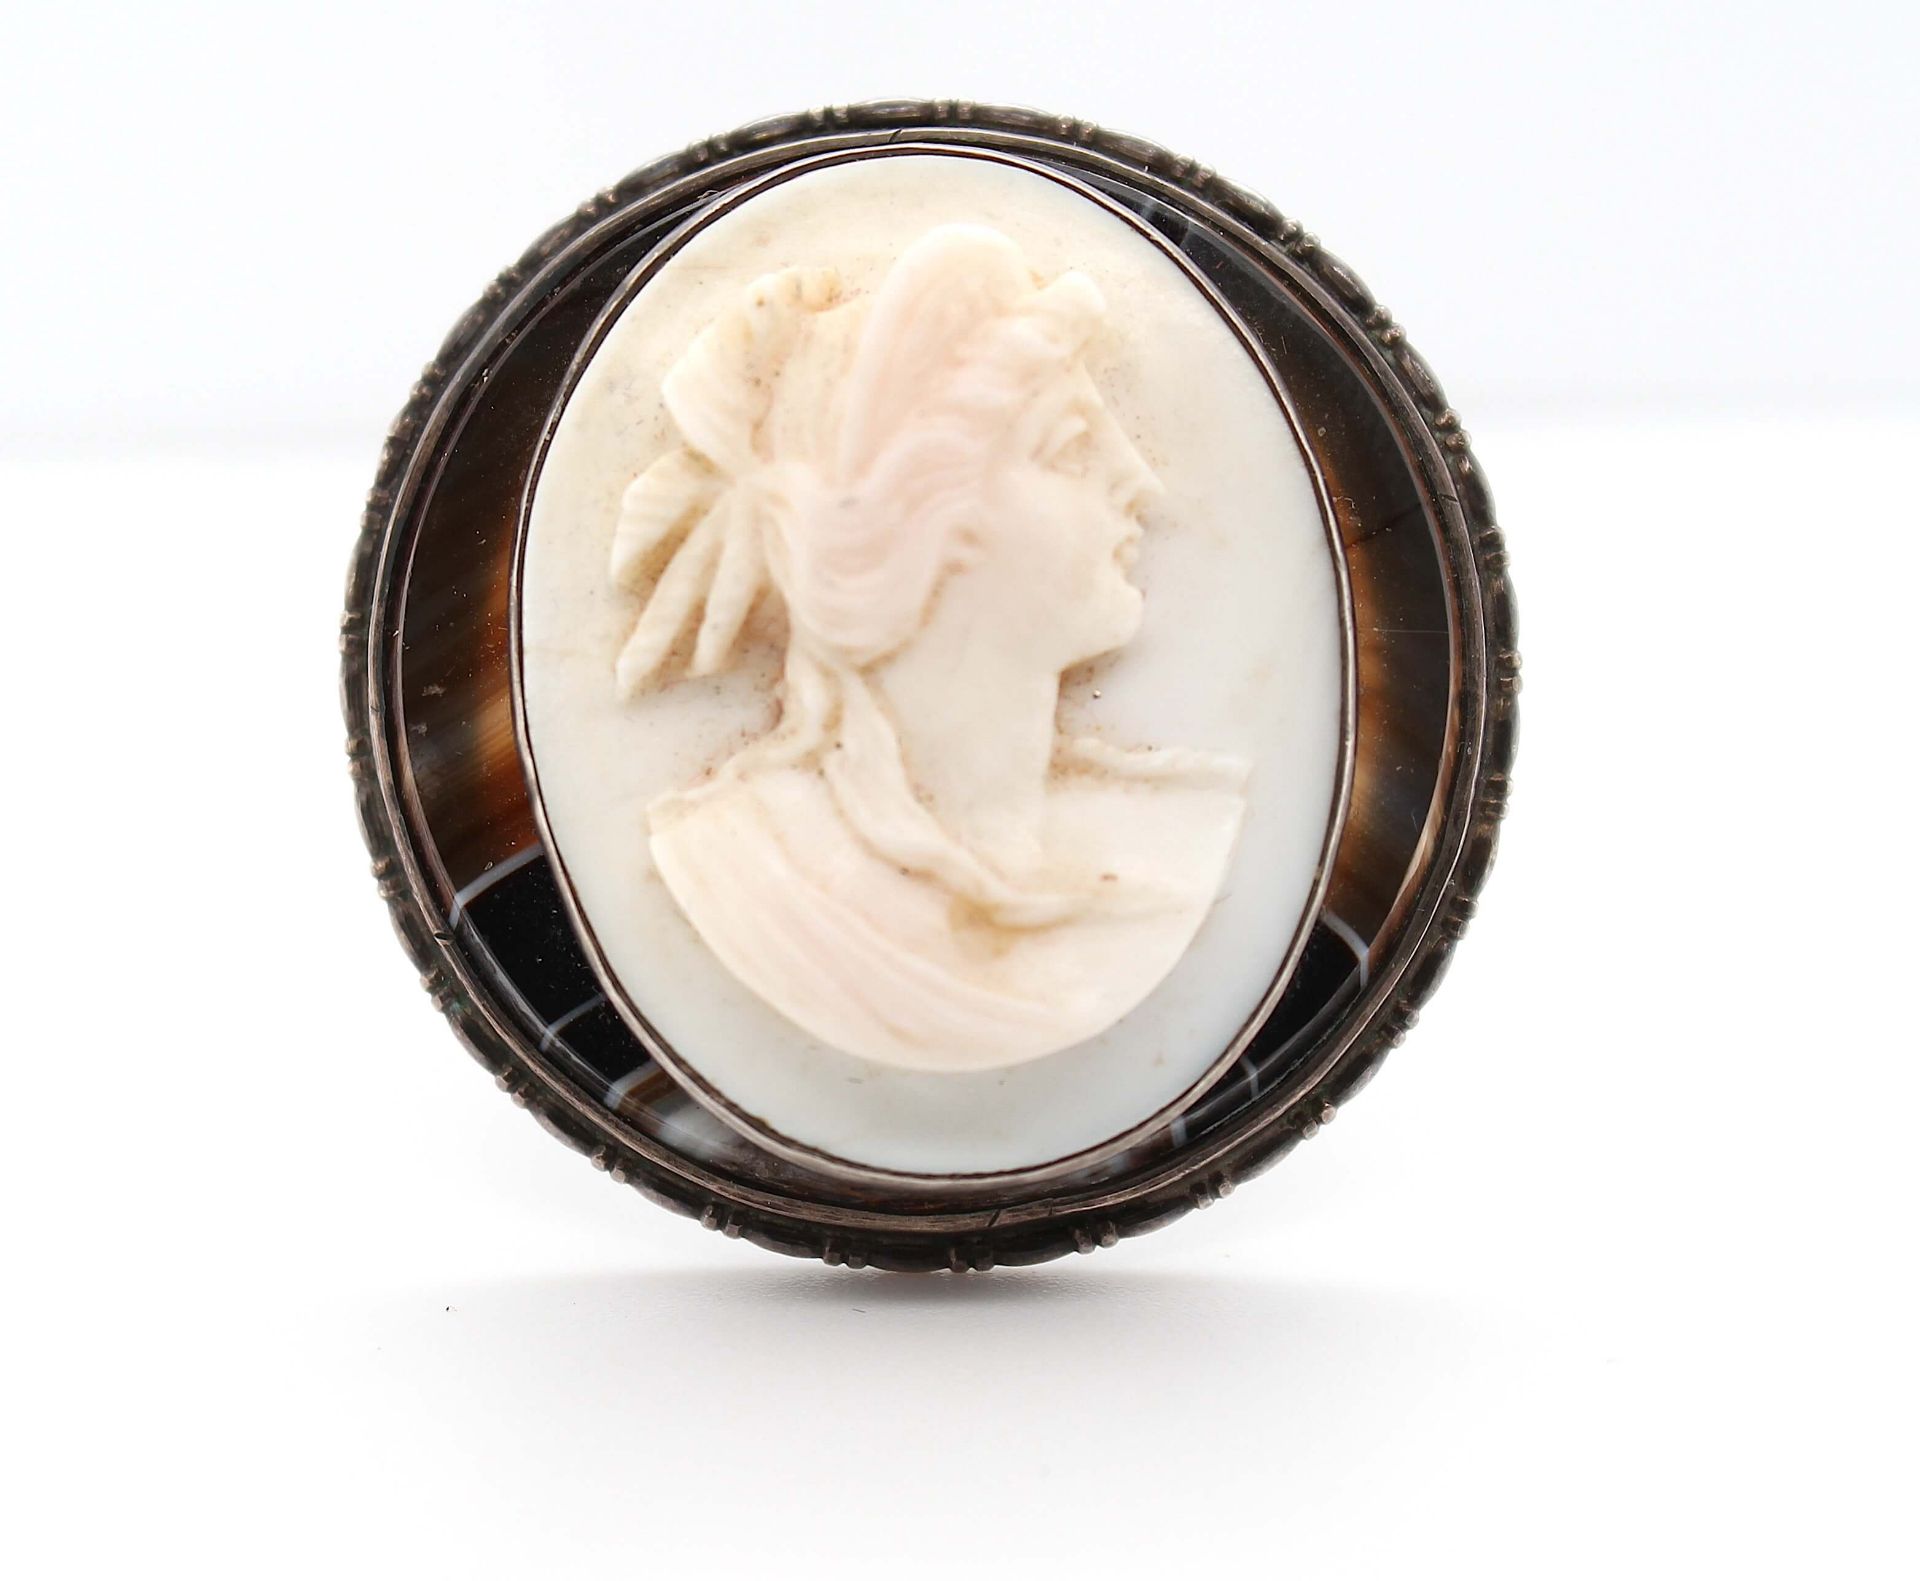 Brooch with shell cameo on agate - Image 2 of 3